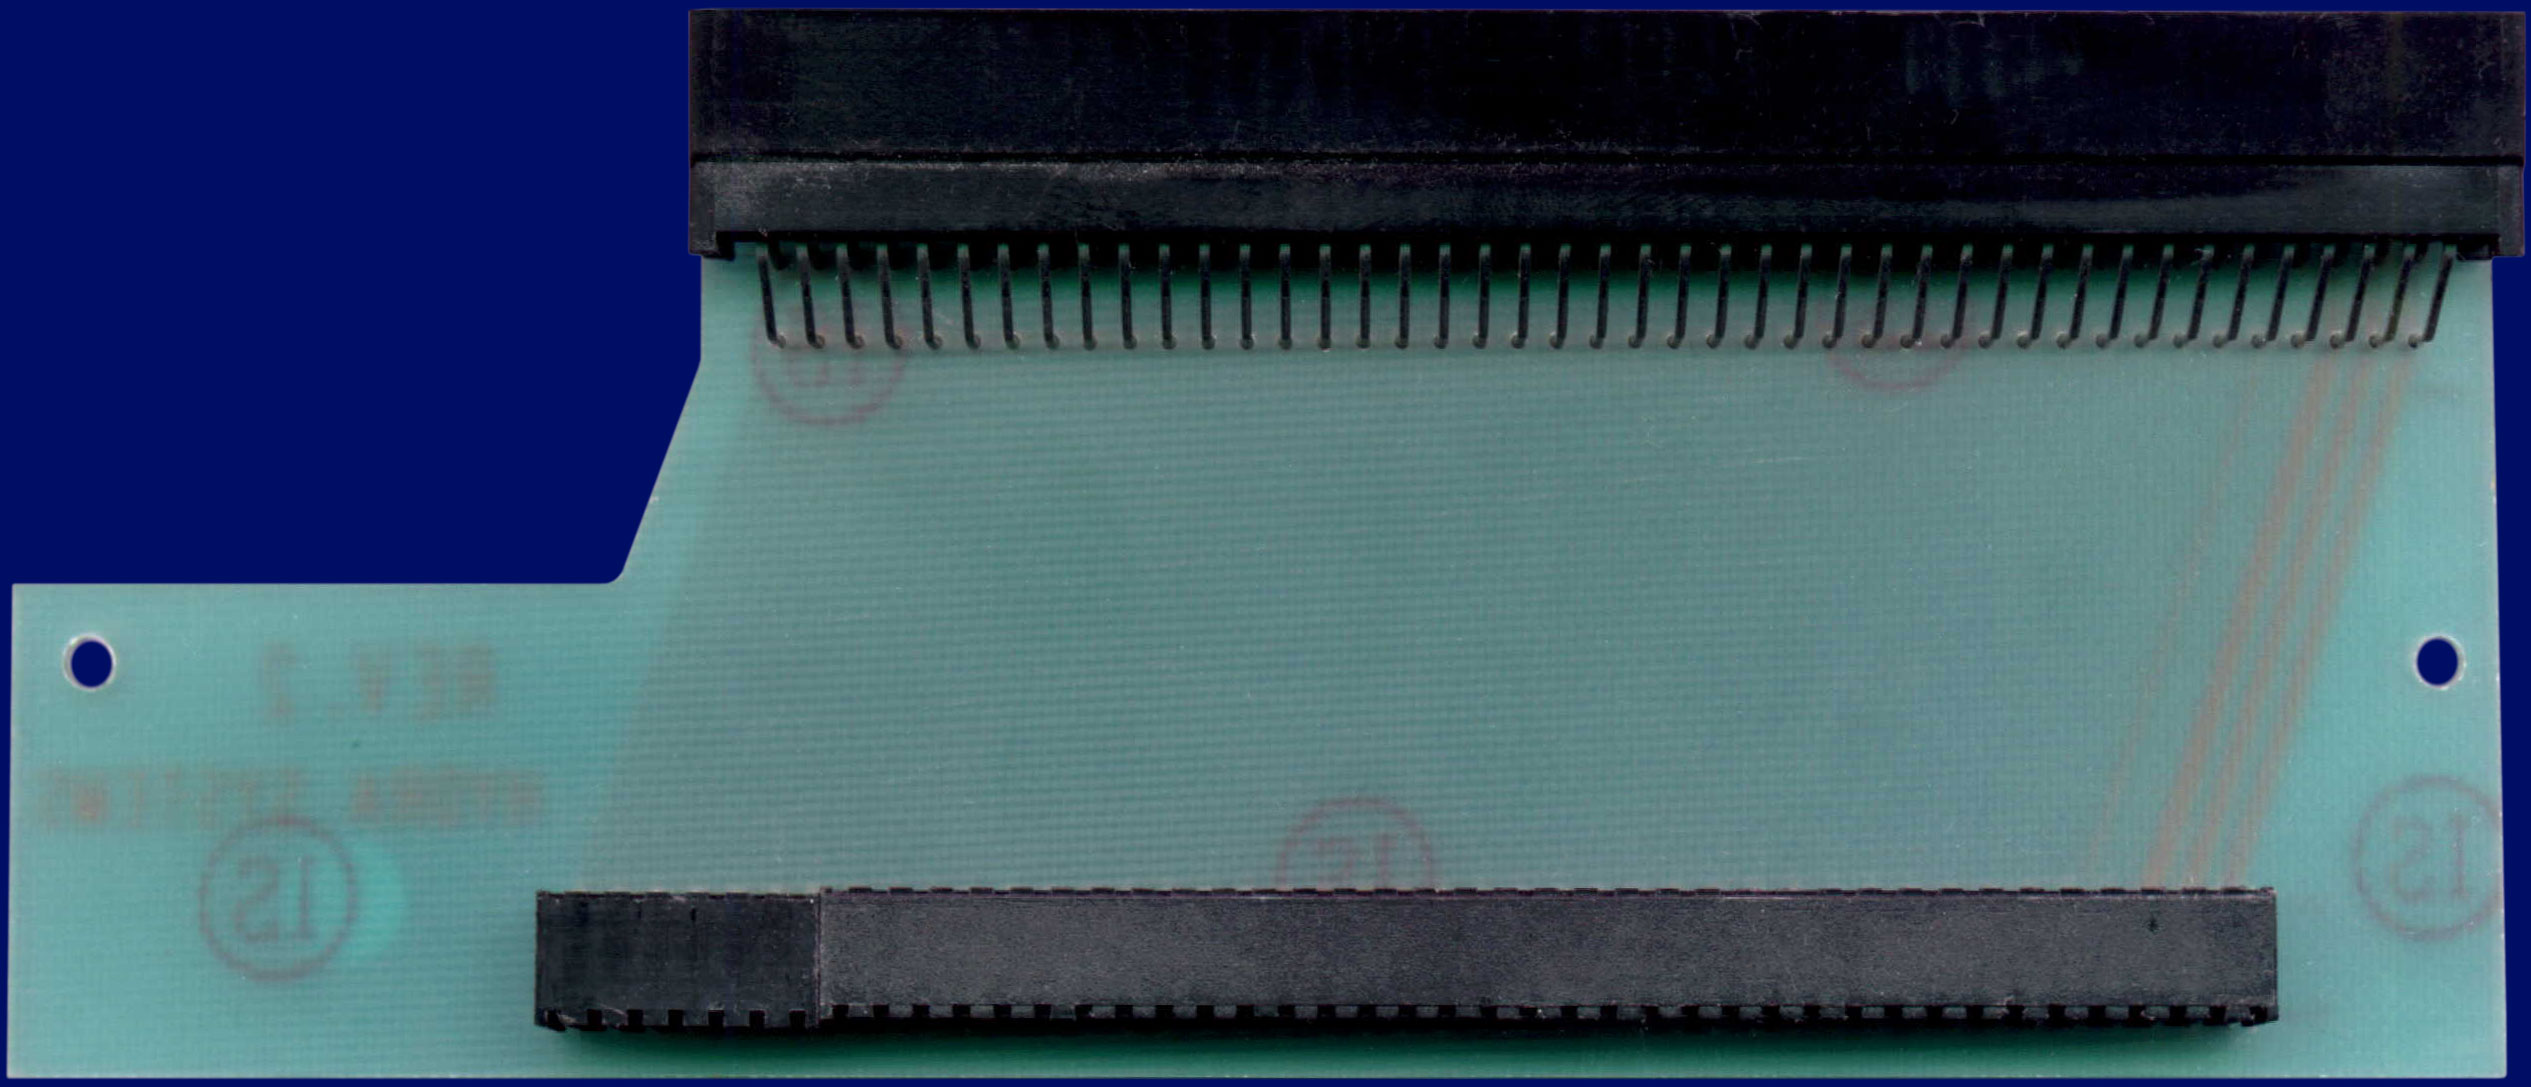 Hydra Systems AmigaNet 500 - Connector board, front side